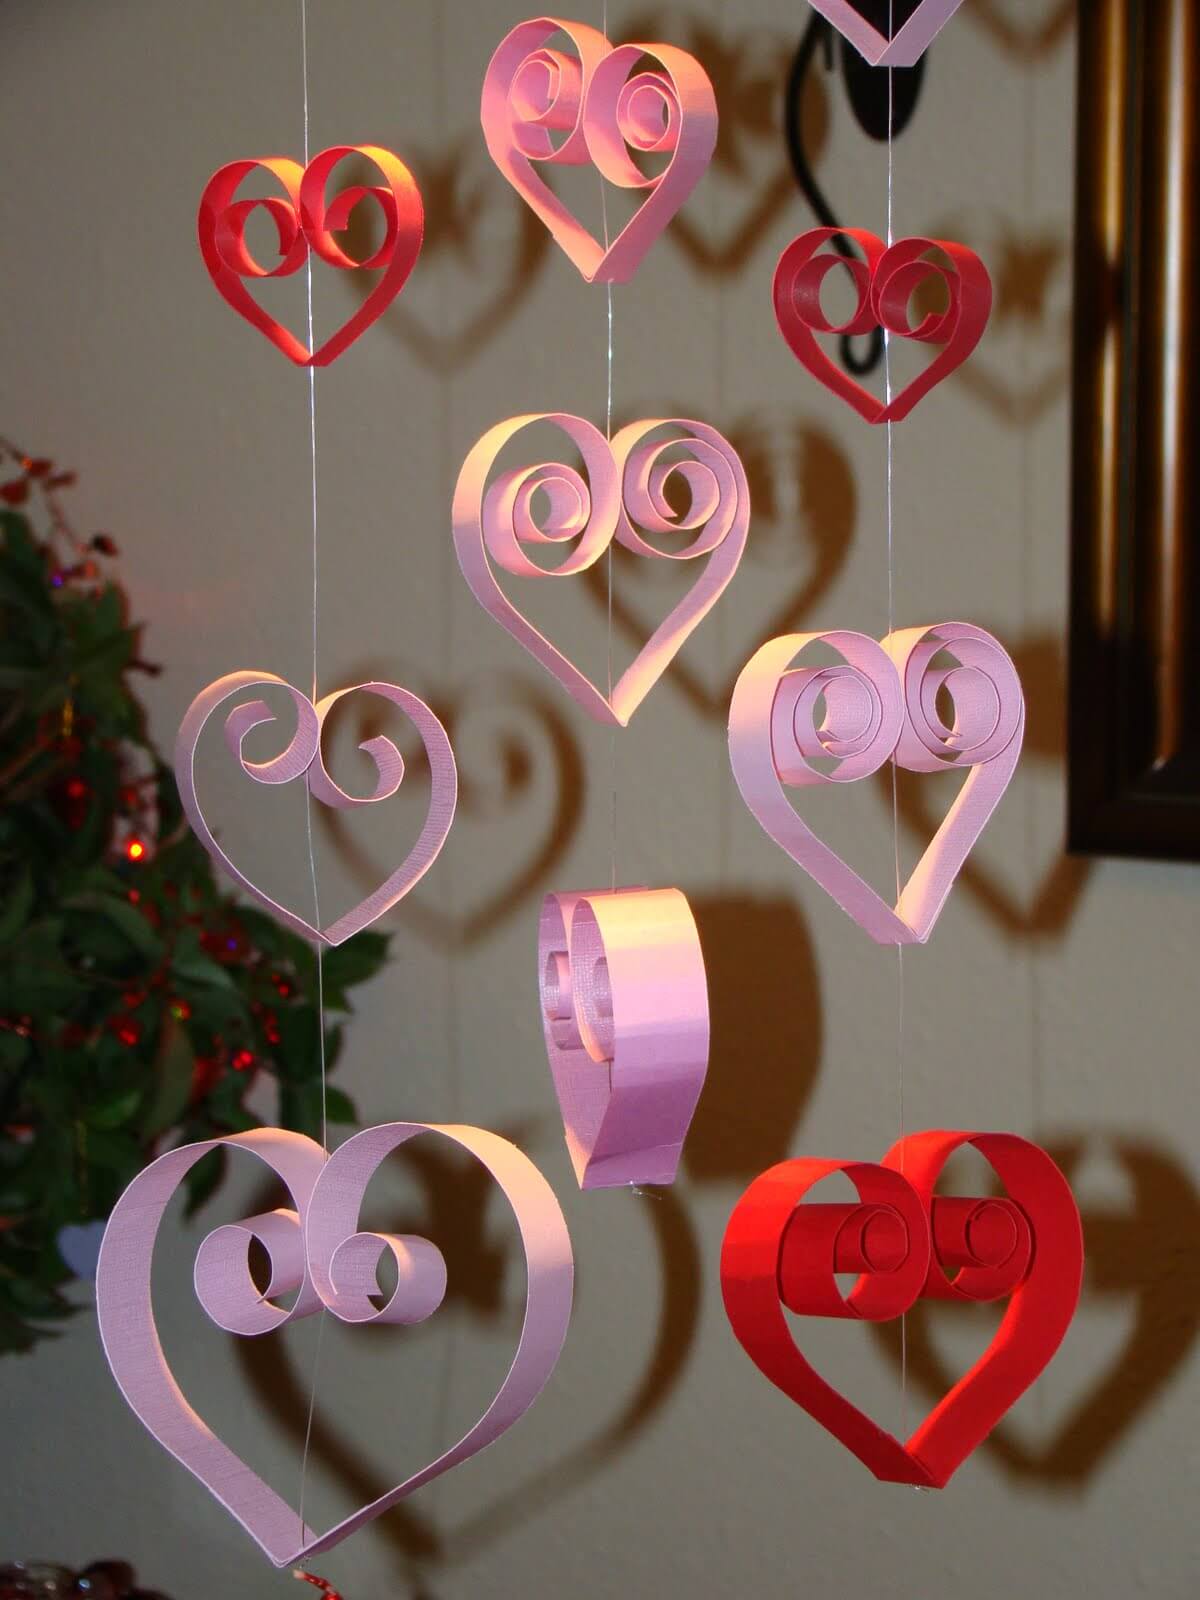 A group of paper hearts hanging from strings
